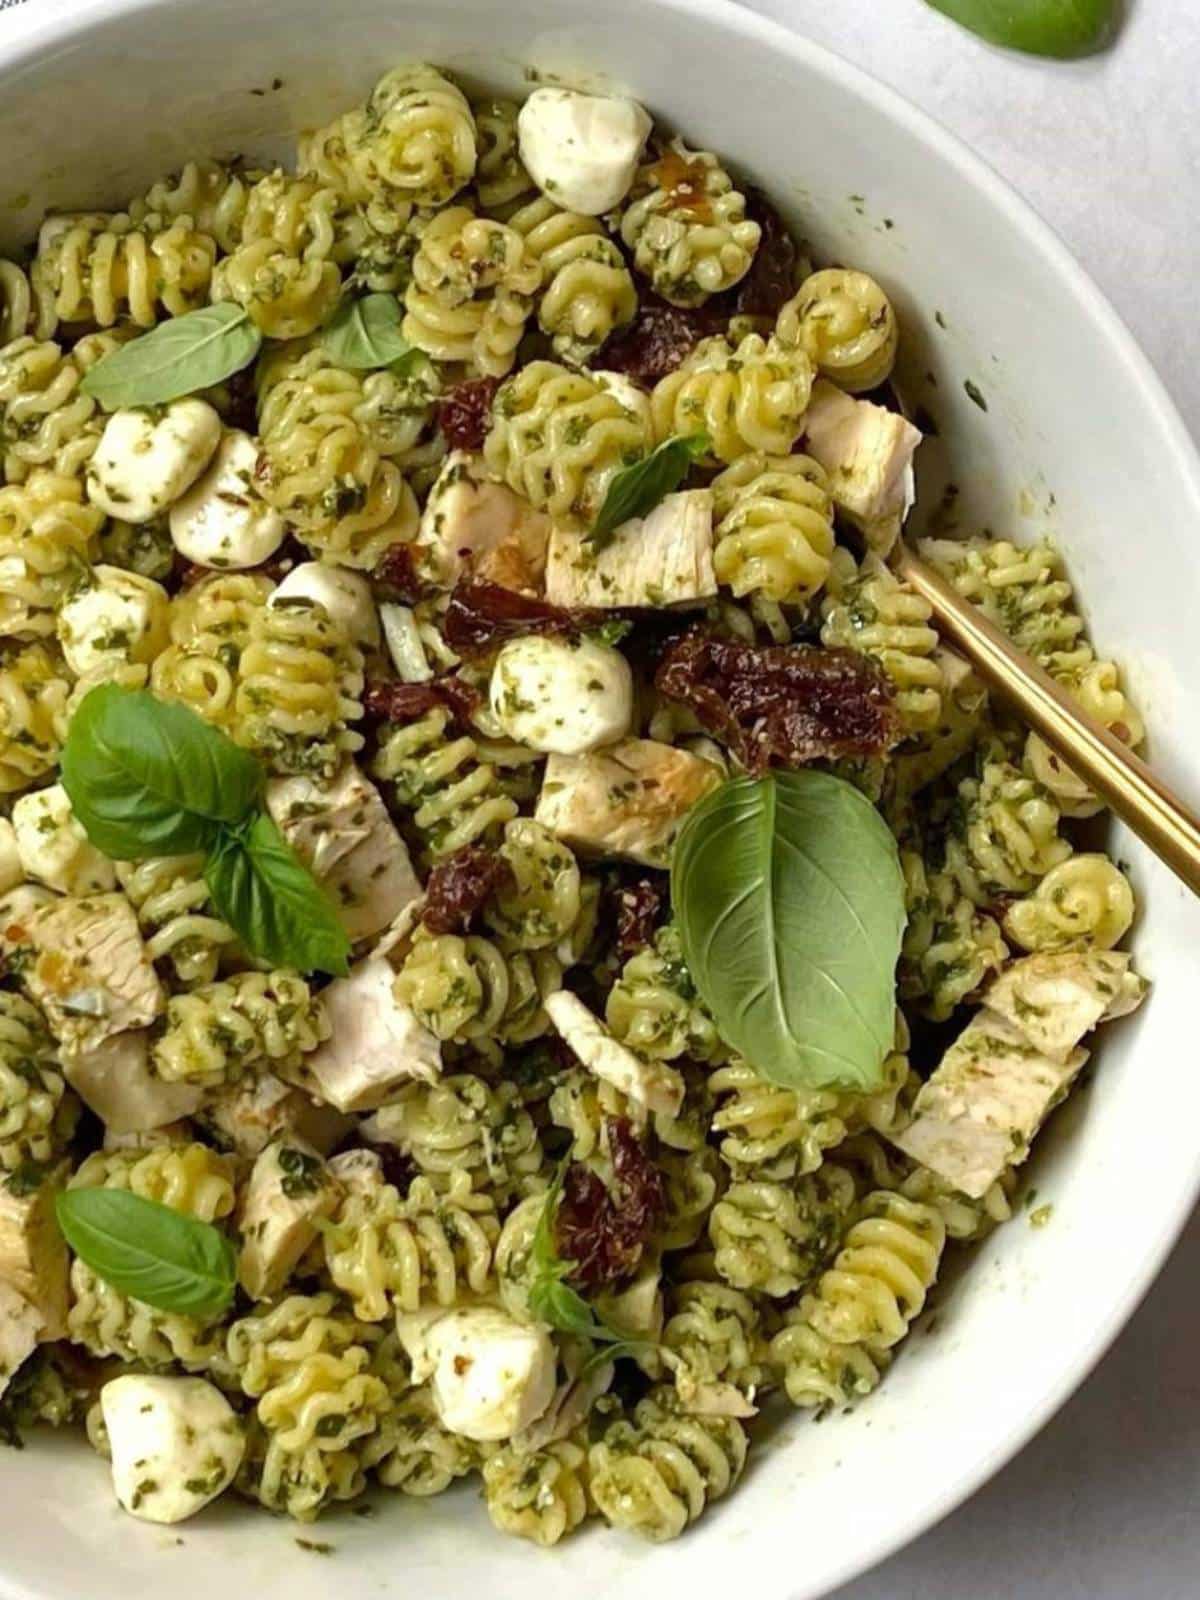 off center bowl of pasta salad with serving spoon.